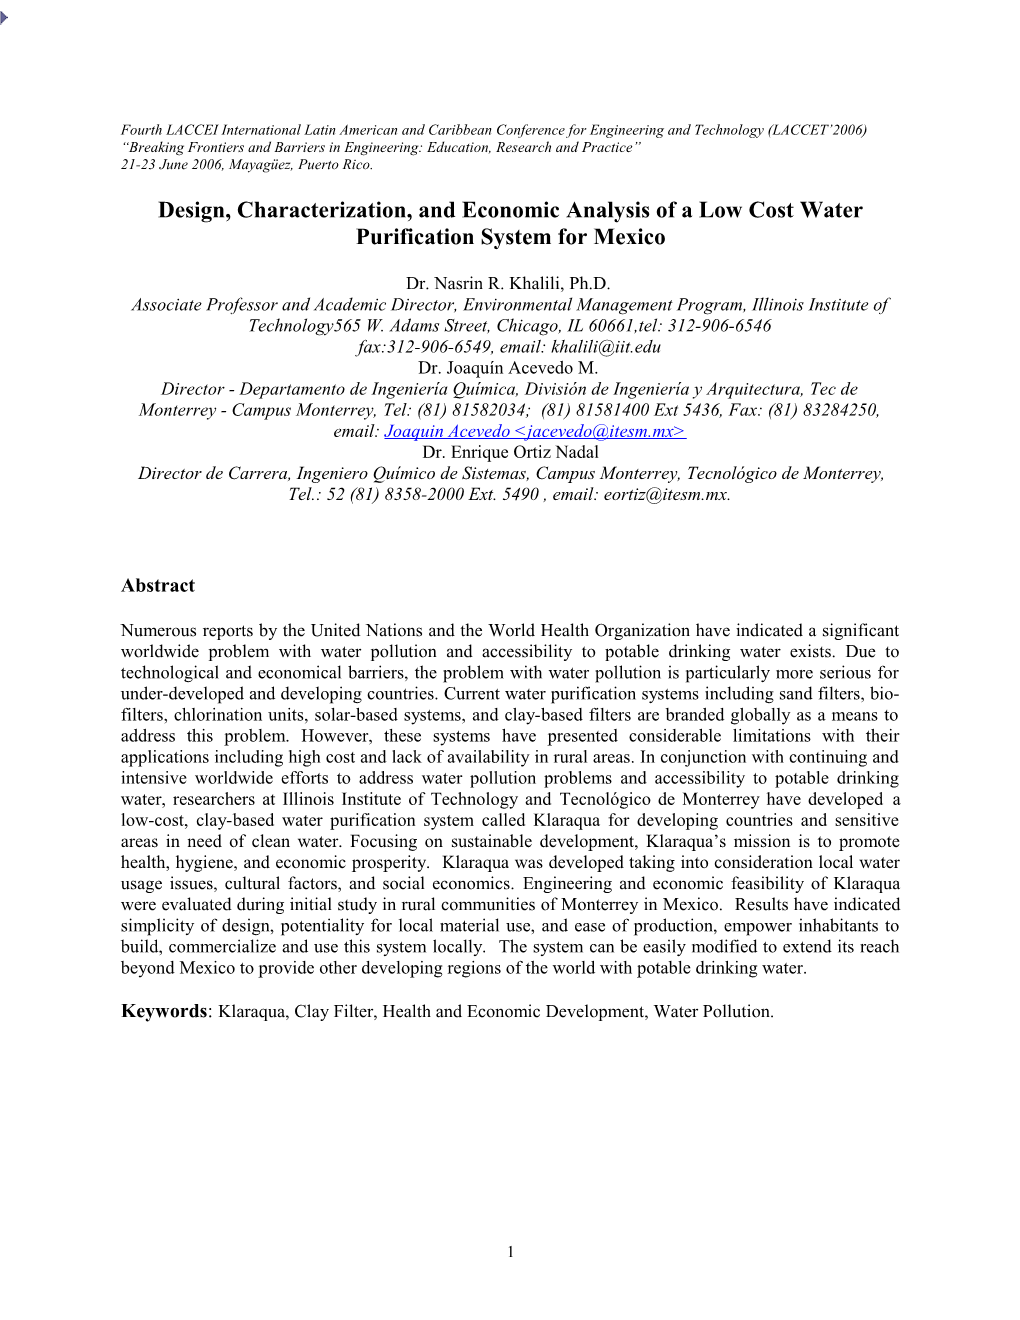 Design, Characterization, and Economic Analysis of a Low Cost Water Purification System